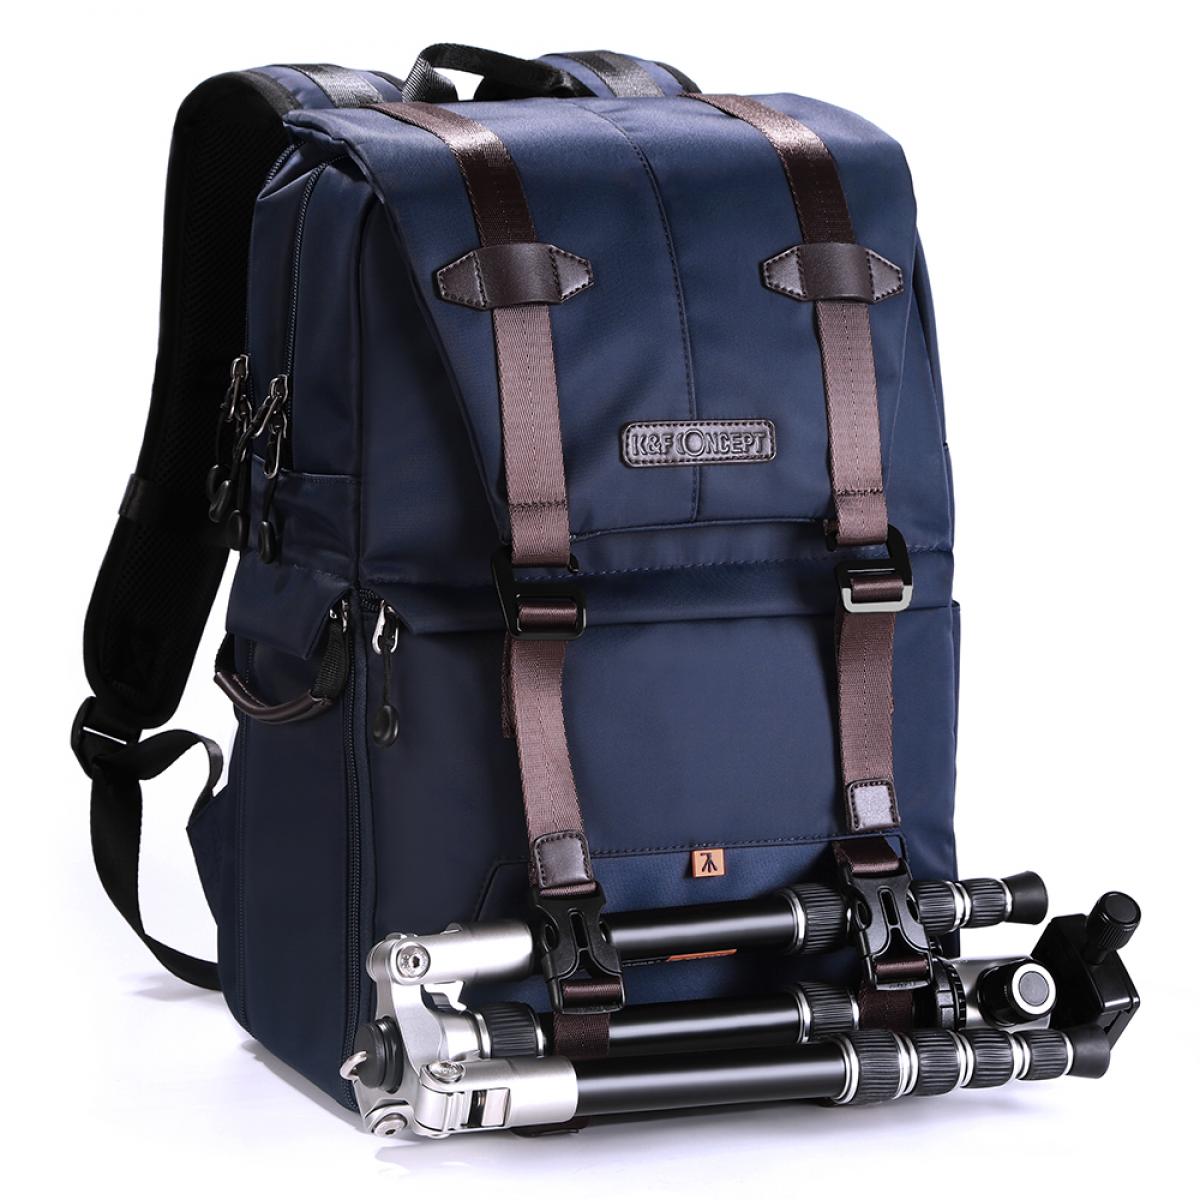 Multifunctional Camera Backpack 20L Stylish DSLR/SLR Camera Bag Fits 15.6 Inch Laptop, Waterproof, with Tripod Straps for Man/Women Outdoor Photography/Hiking/Travel Deep Blue